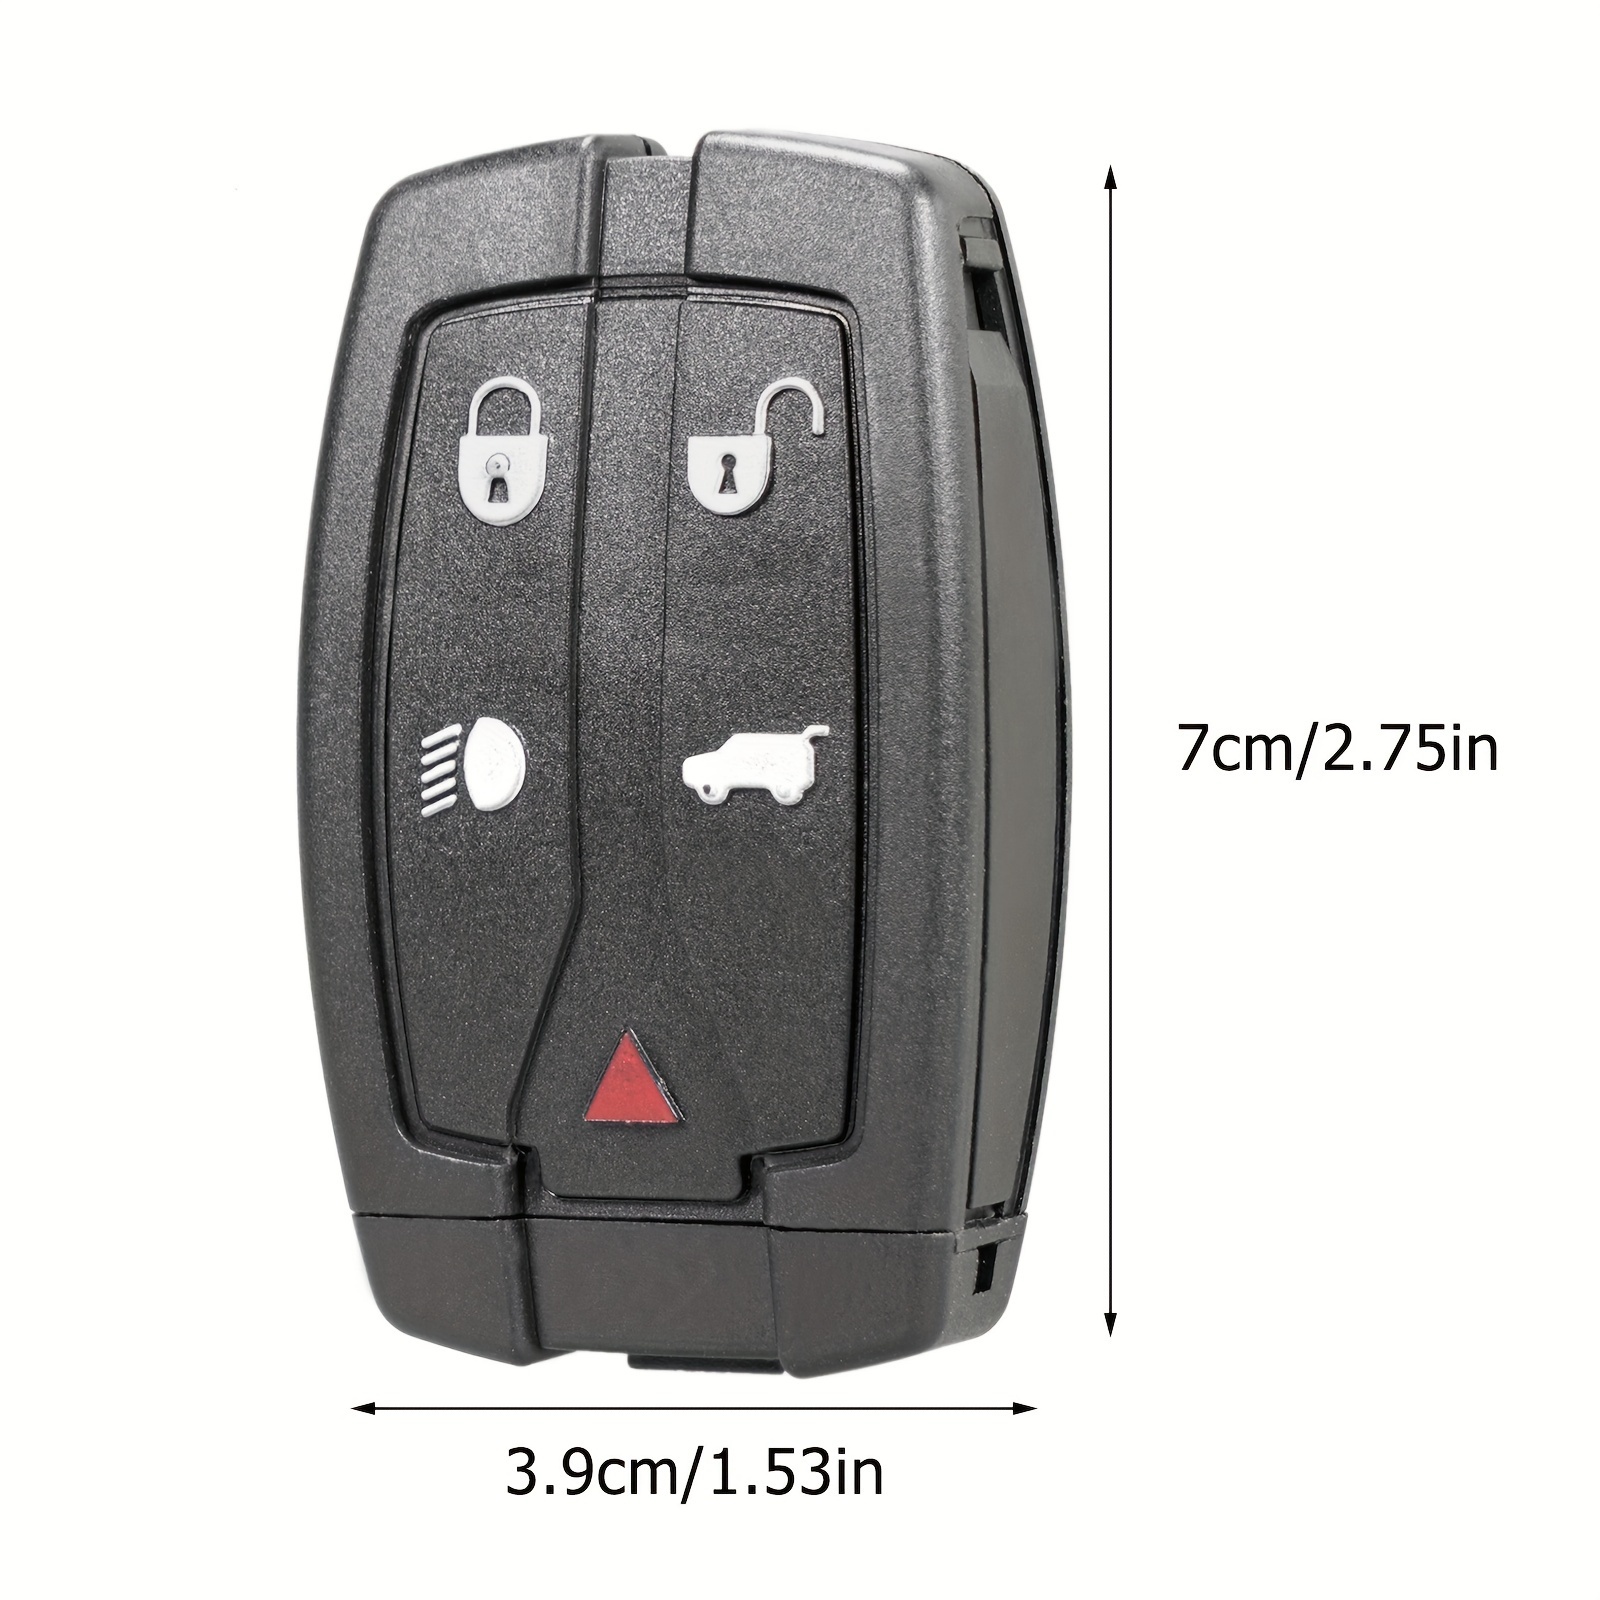 Land Rover Freelander 2 New Complete Remote Key Fob & Blade Land Rover  Freelander 2 New Complete Remote Key Fob & Blade The fob will need to be  taken to a Land